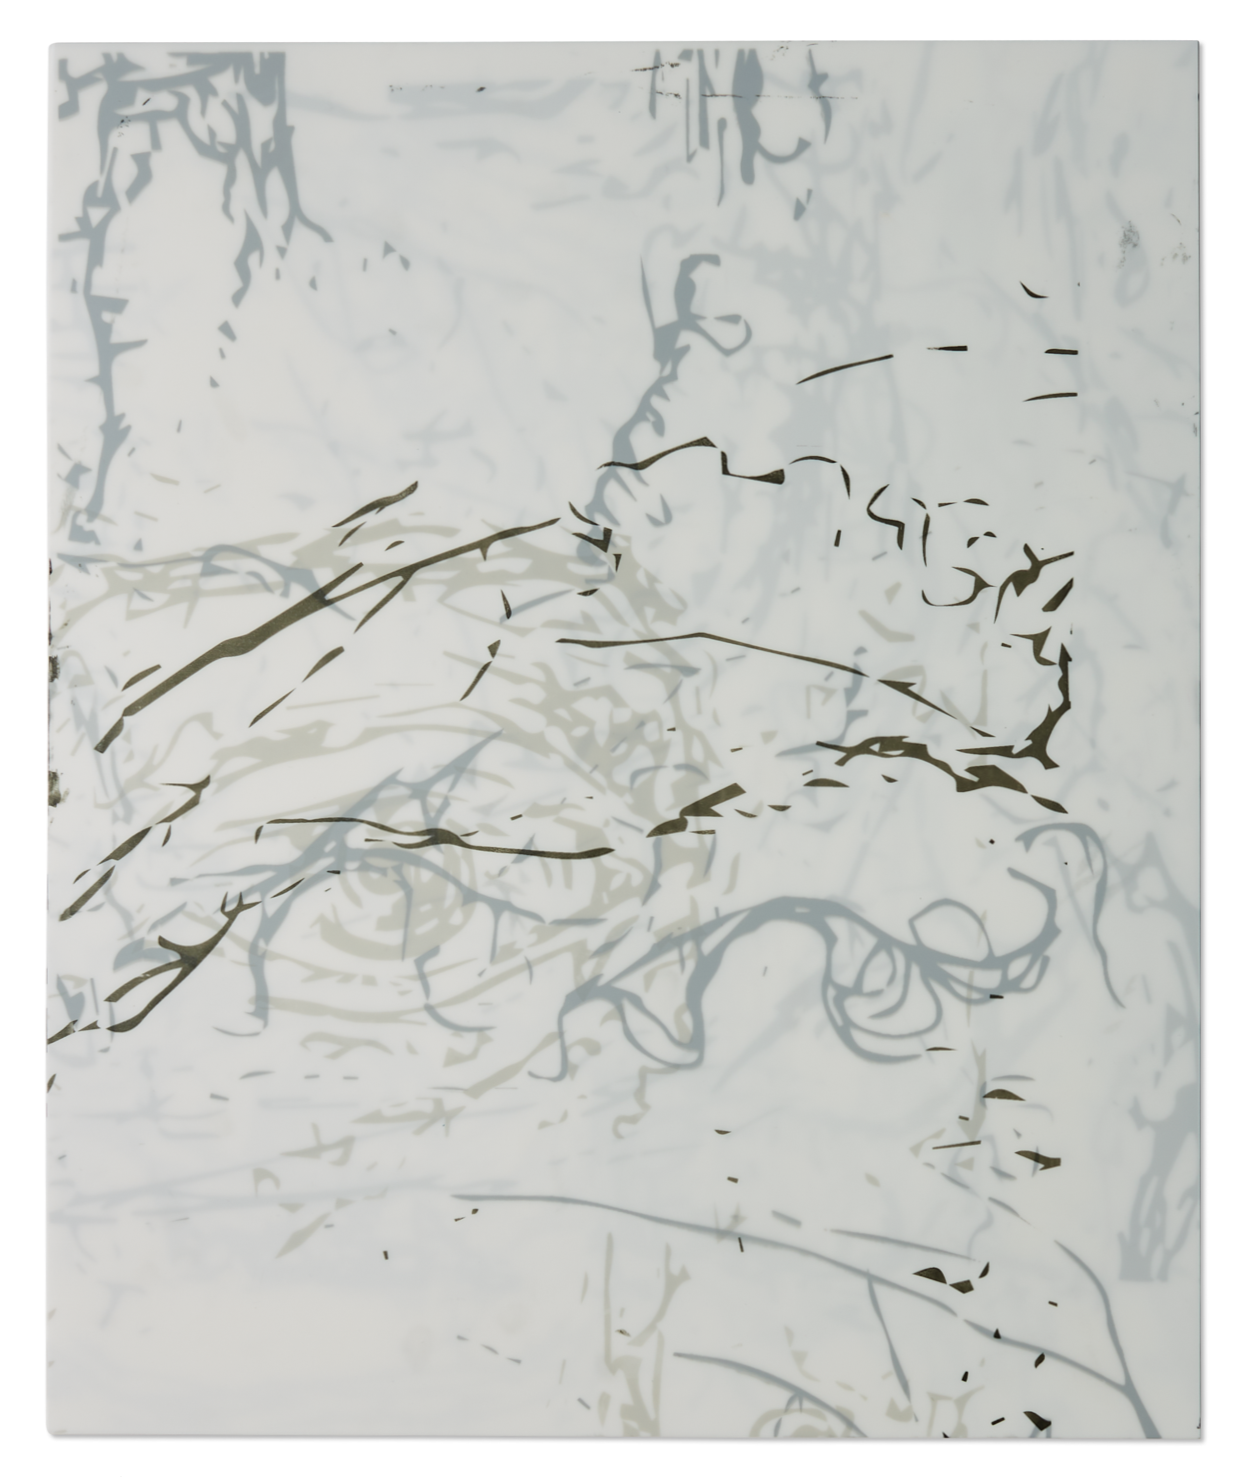 Photograph of an artwork by artist Caroline Coolidge showing stacks of transparent paper with abstract gray line drawings on a white background.